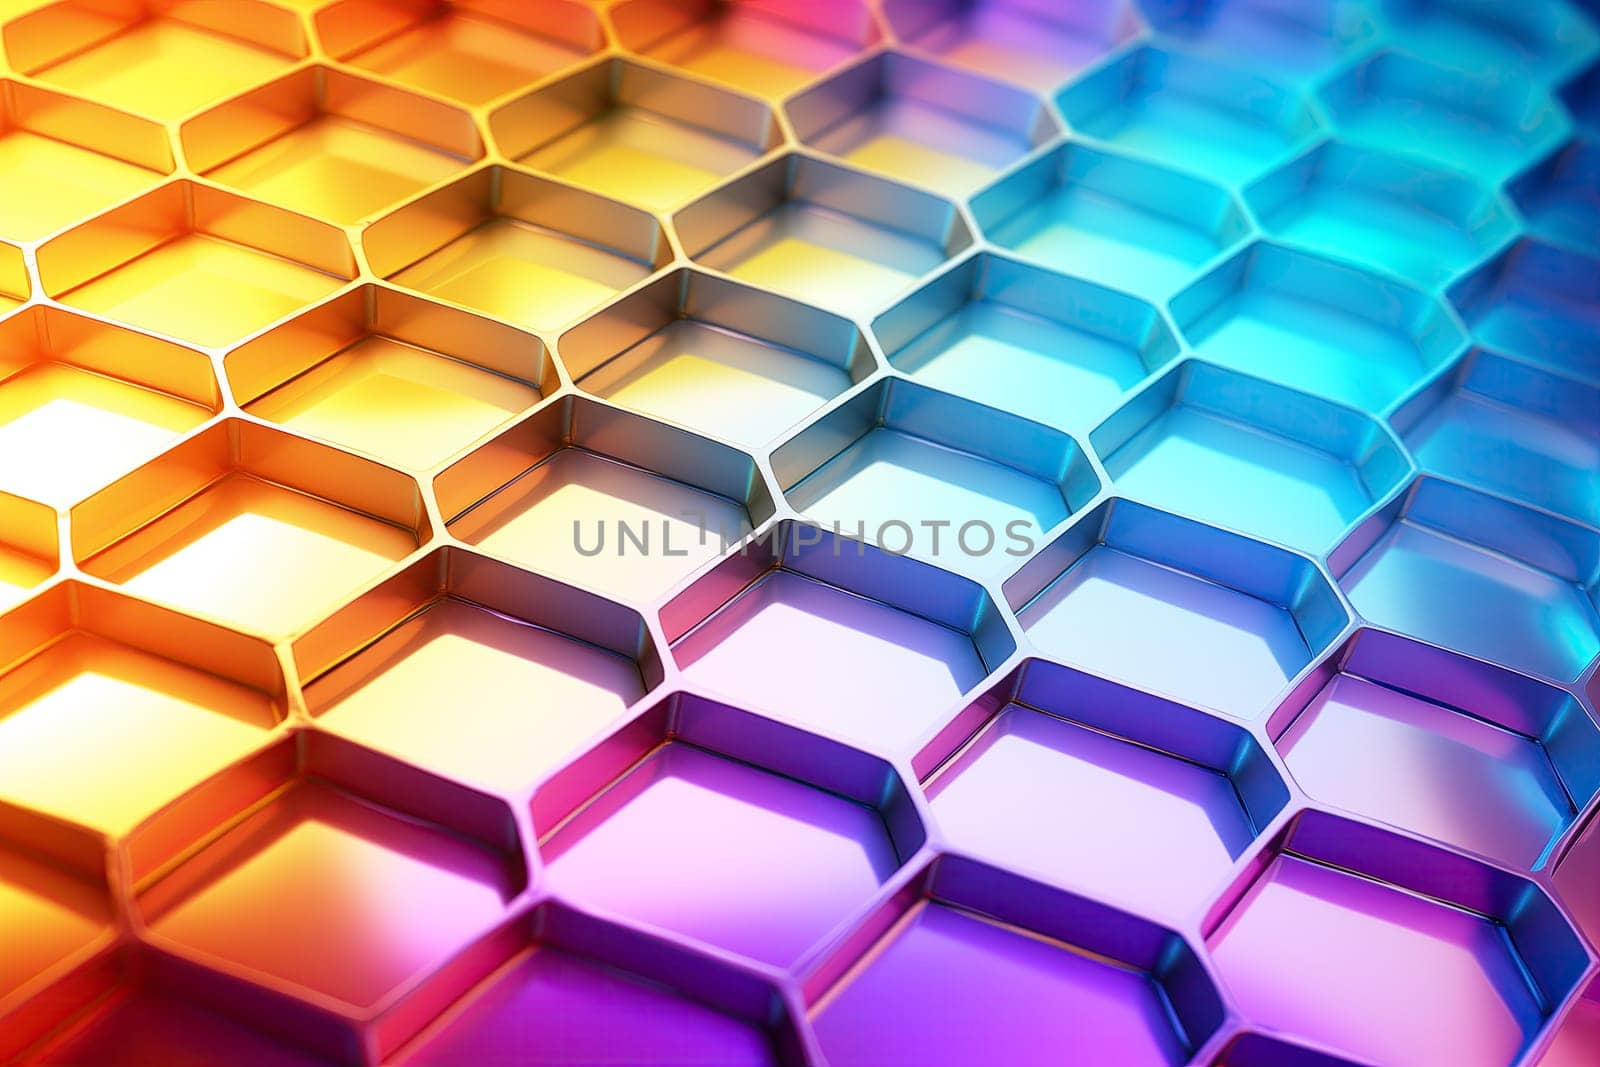 Vibrant Honeycomb Gradient Pattern Background by dimol